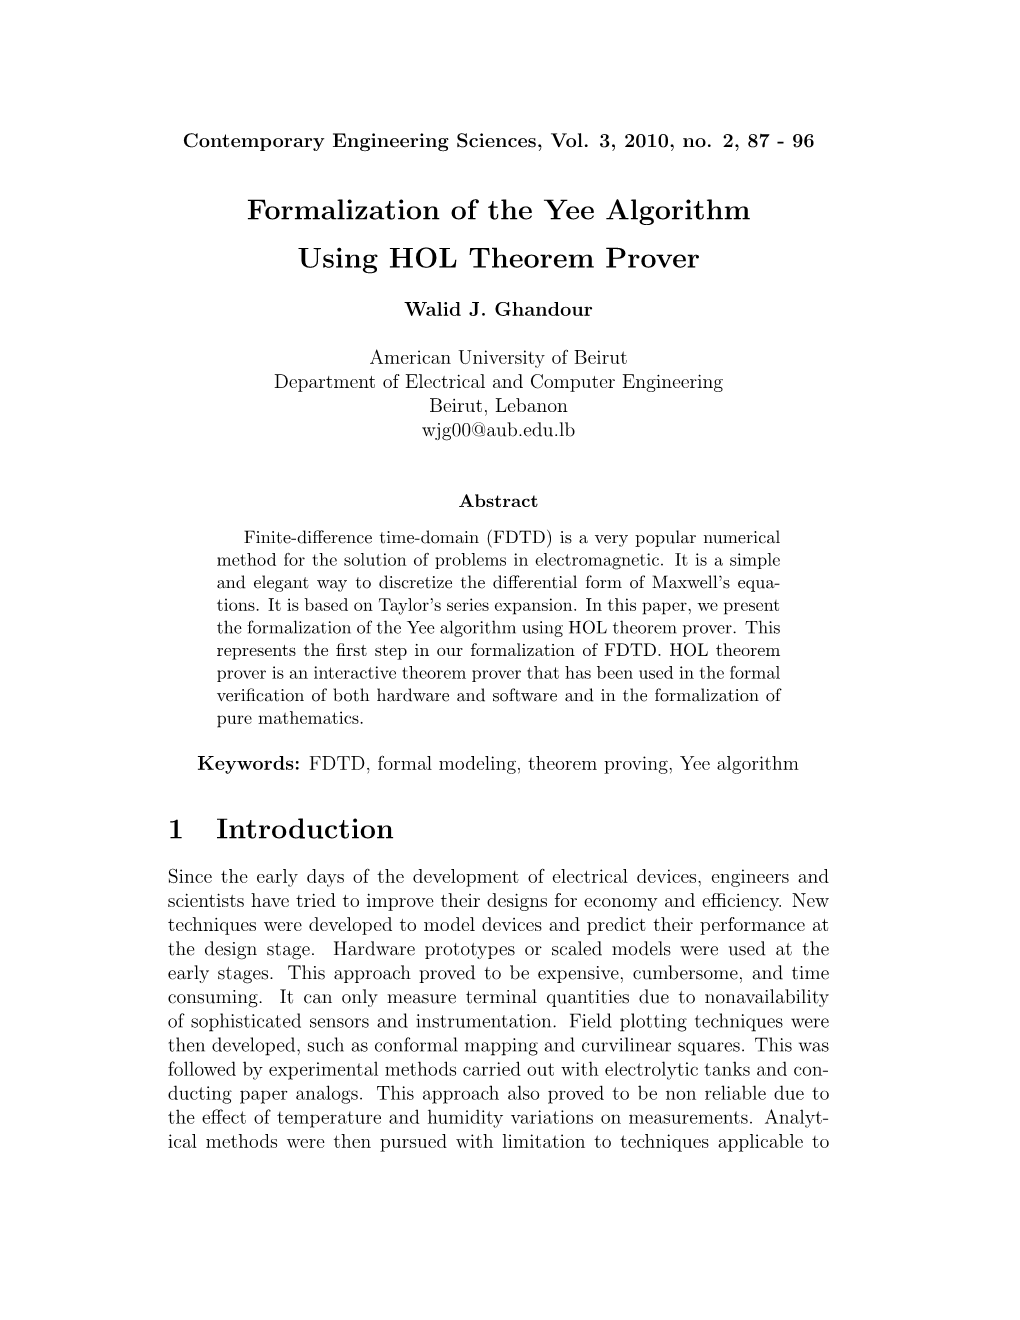 Formalization of the Yee Algorithm Using HOL Theorem Prover